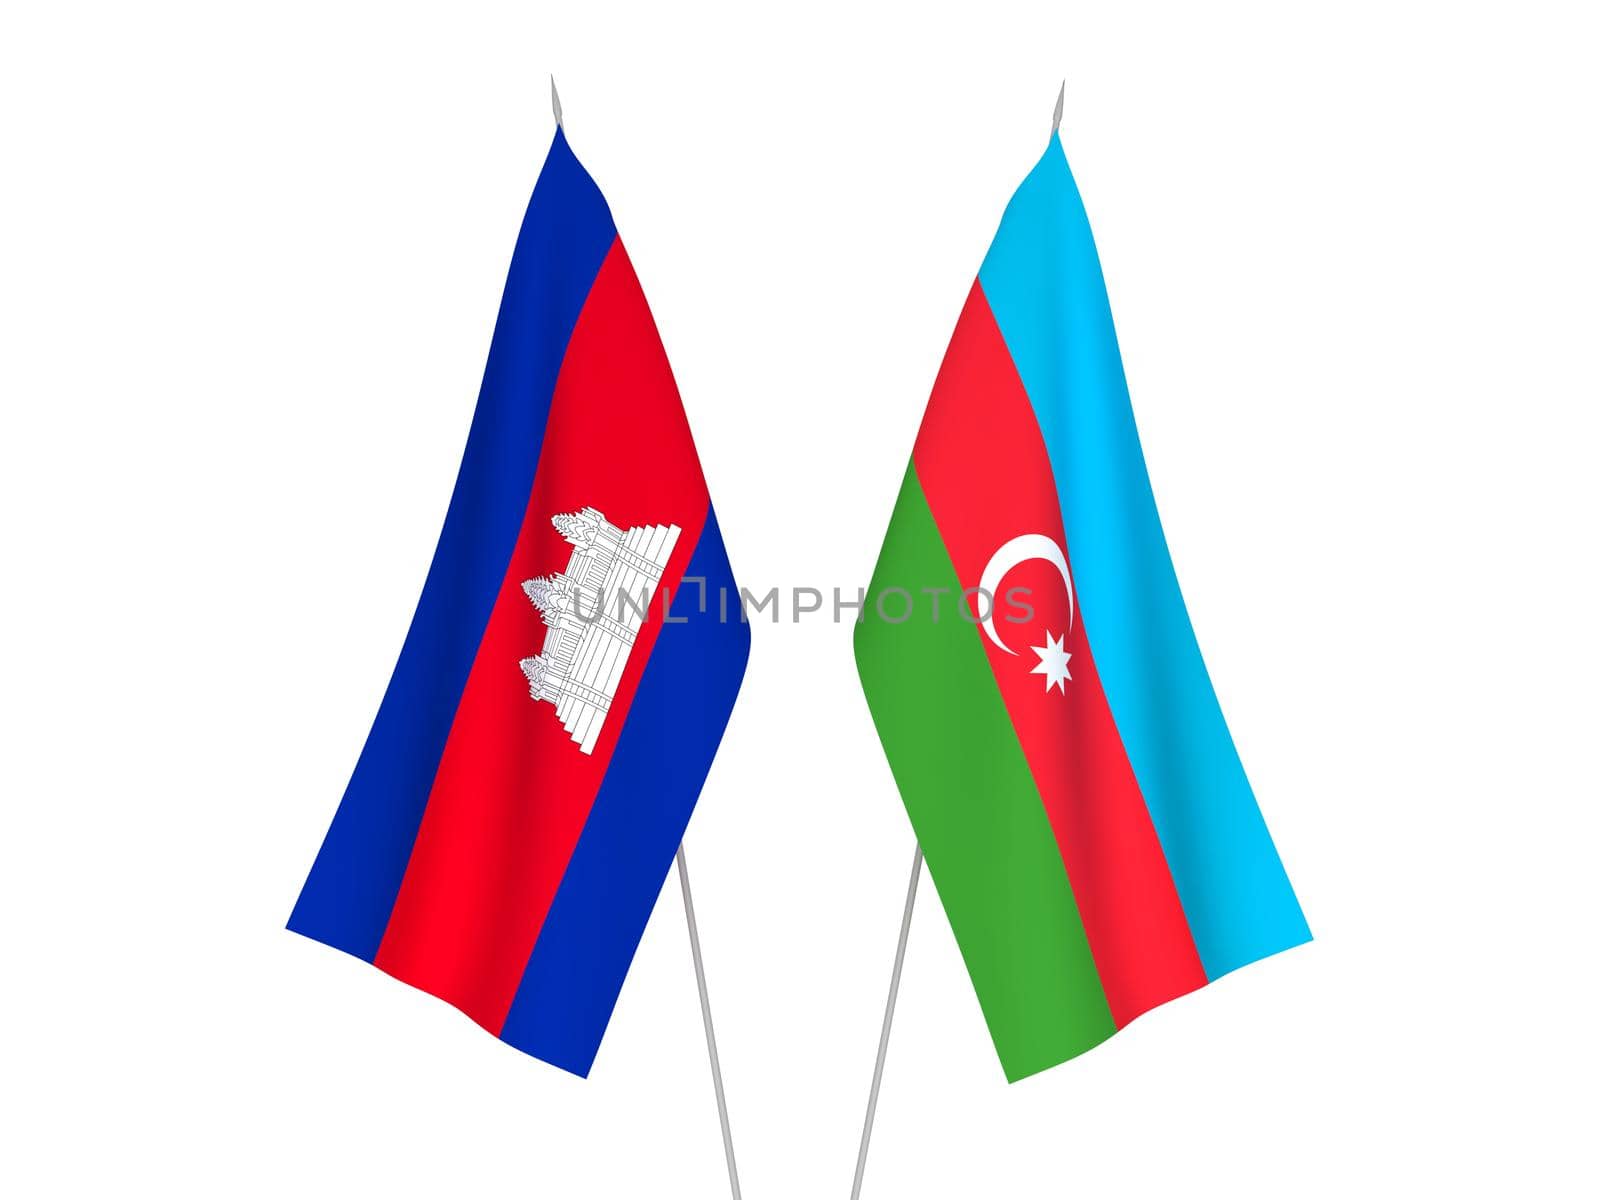 Republic of Azerbaijan and Kingdom of Cambodia flags by epic33